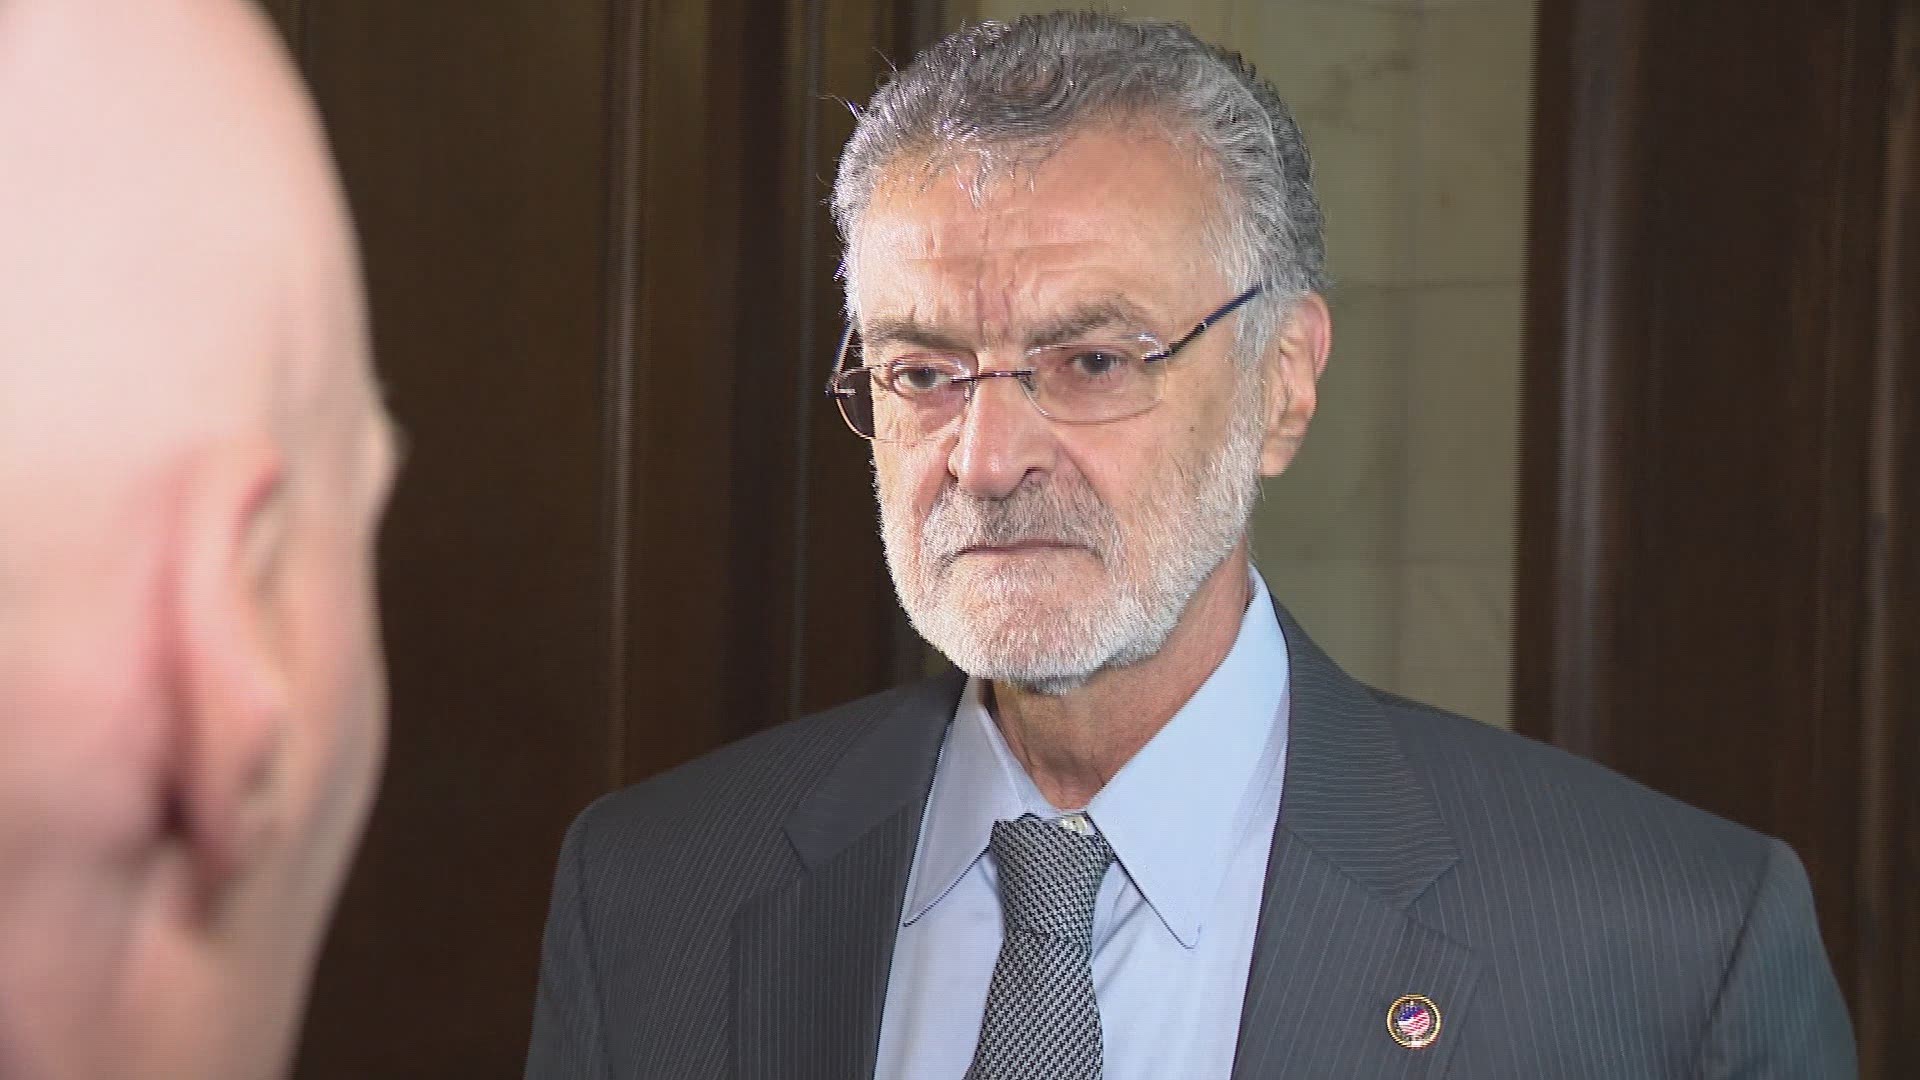 Cleveland Mayor Frank Jackson told reporters that alleged crimes against his family are no one's business. Jackson says he was unaware his grandson was not charged for allegedly beating woman in June.